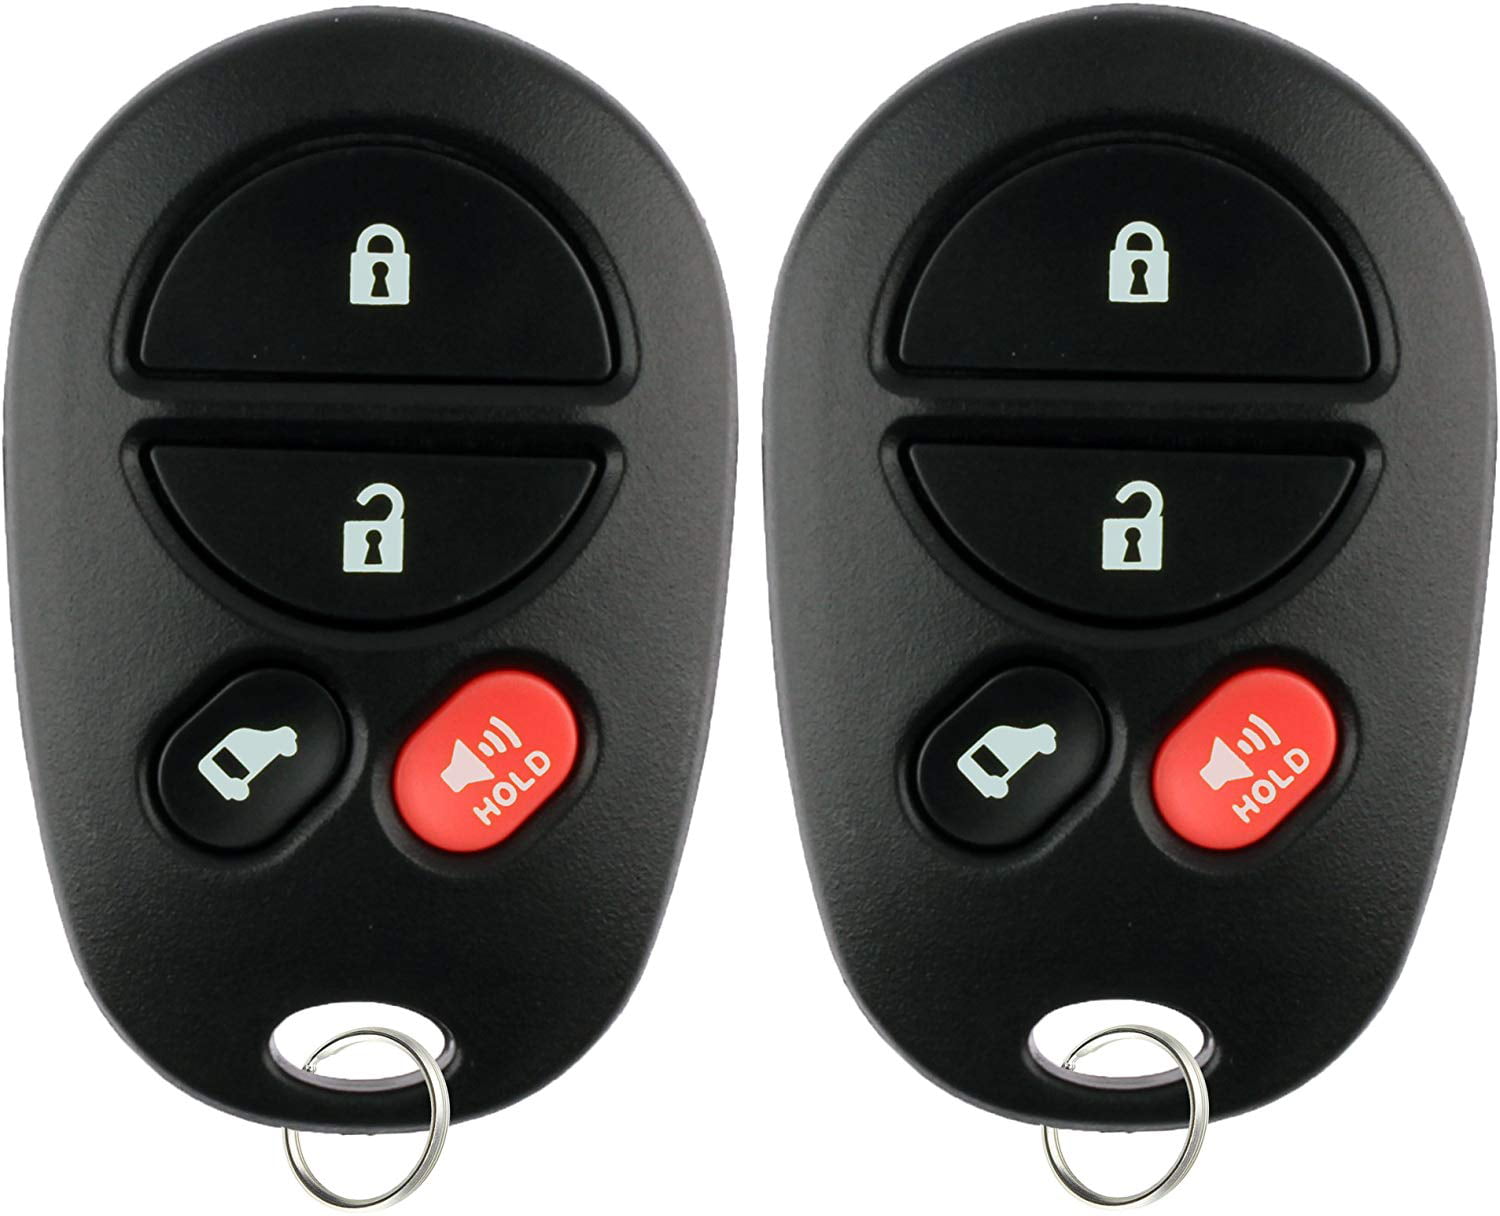 Fob 2 Replacement For 2004 2005 2006 2007 2008 2009 2010 Toyota Sienna Key 